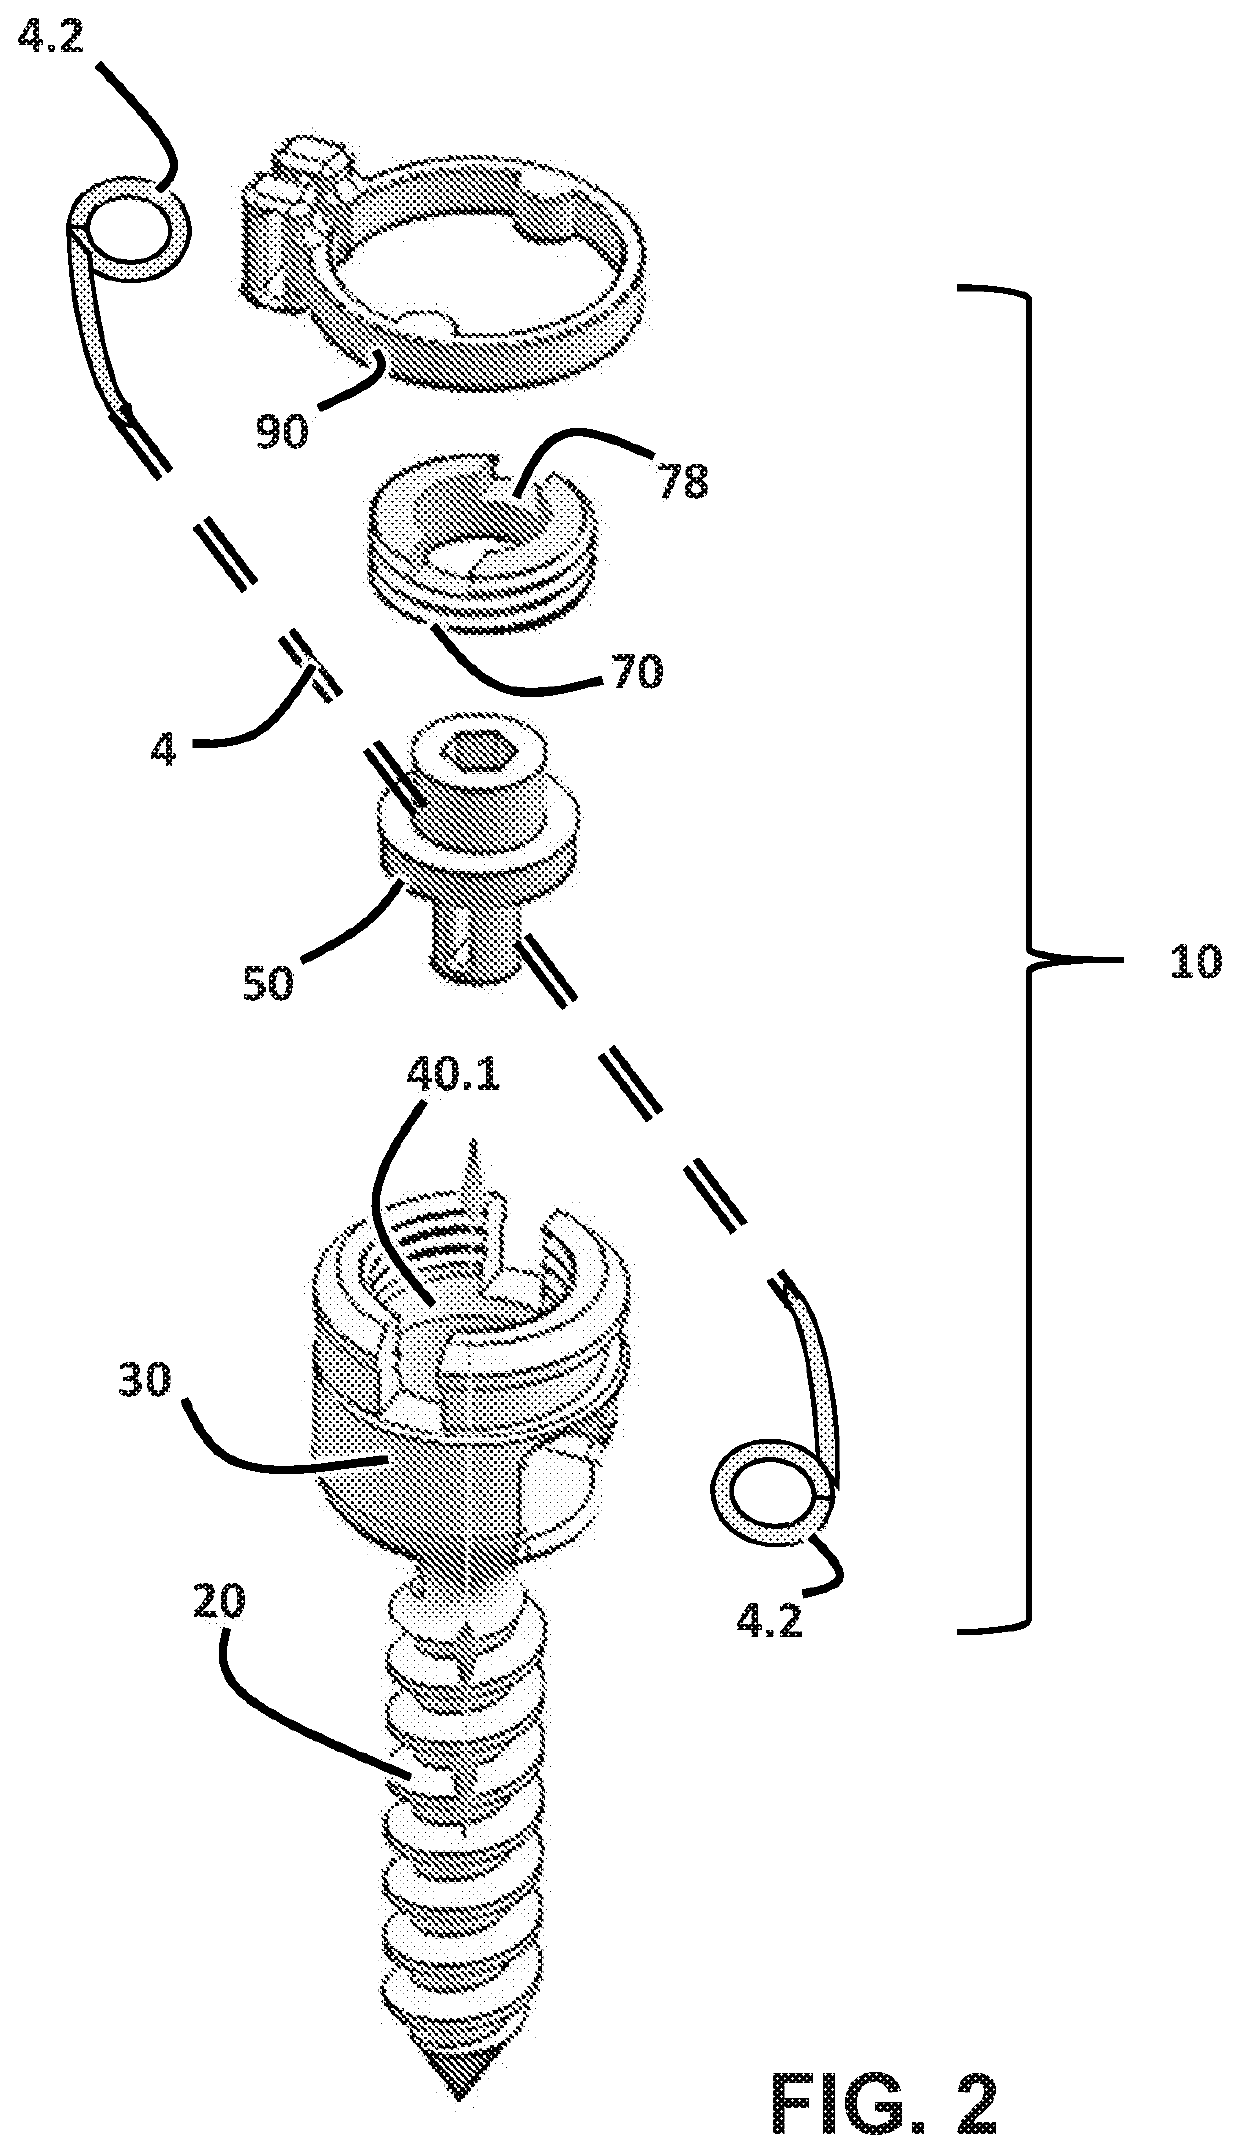 Apparatus and methods for spooled vertebral anchors